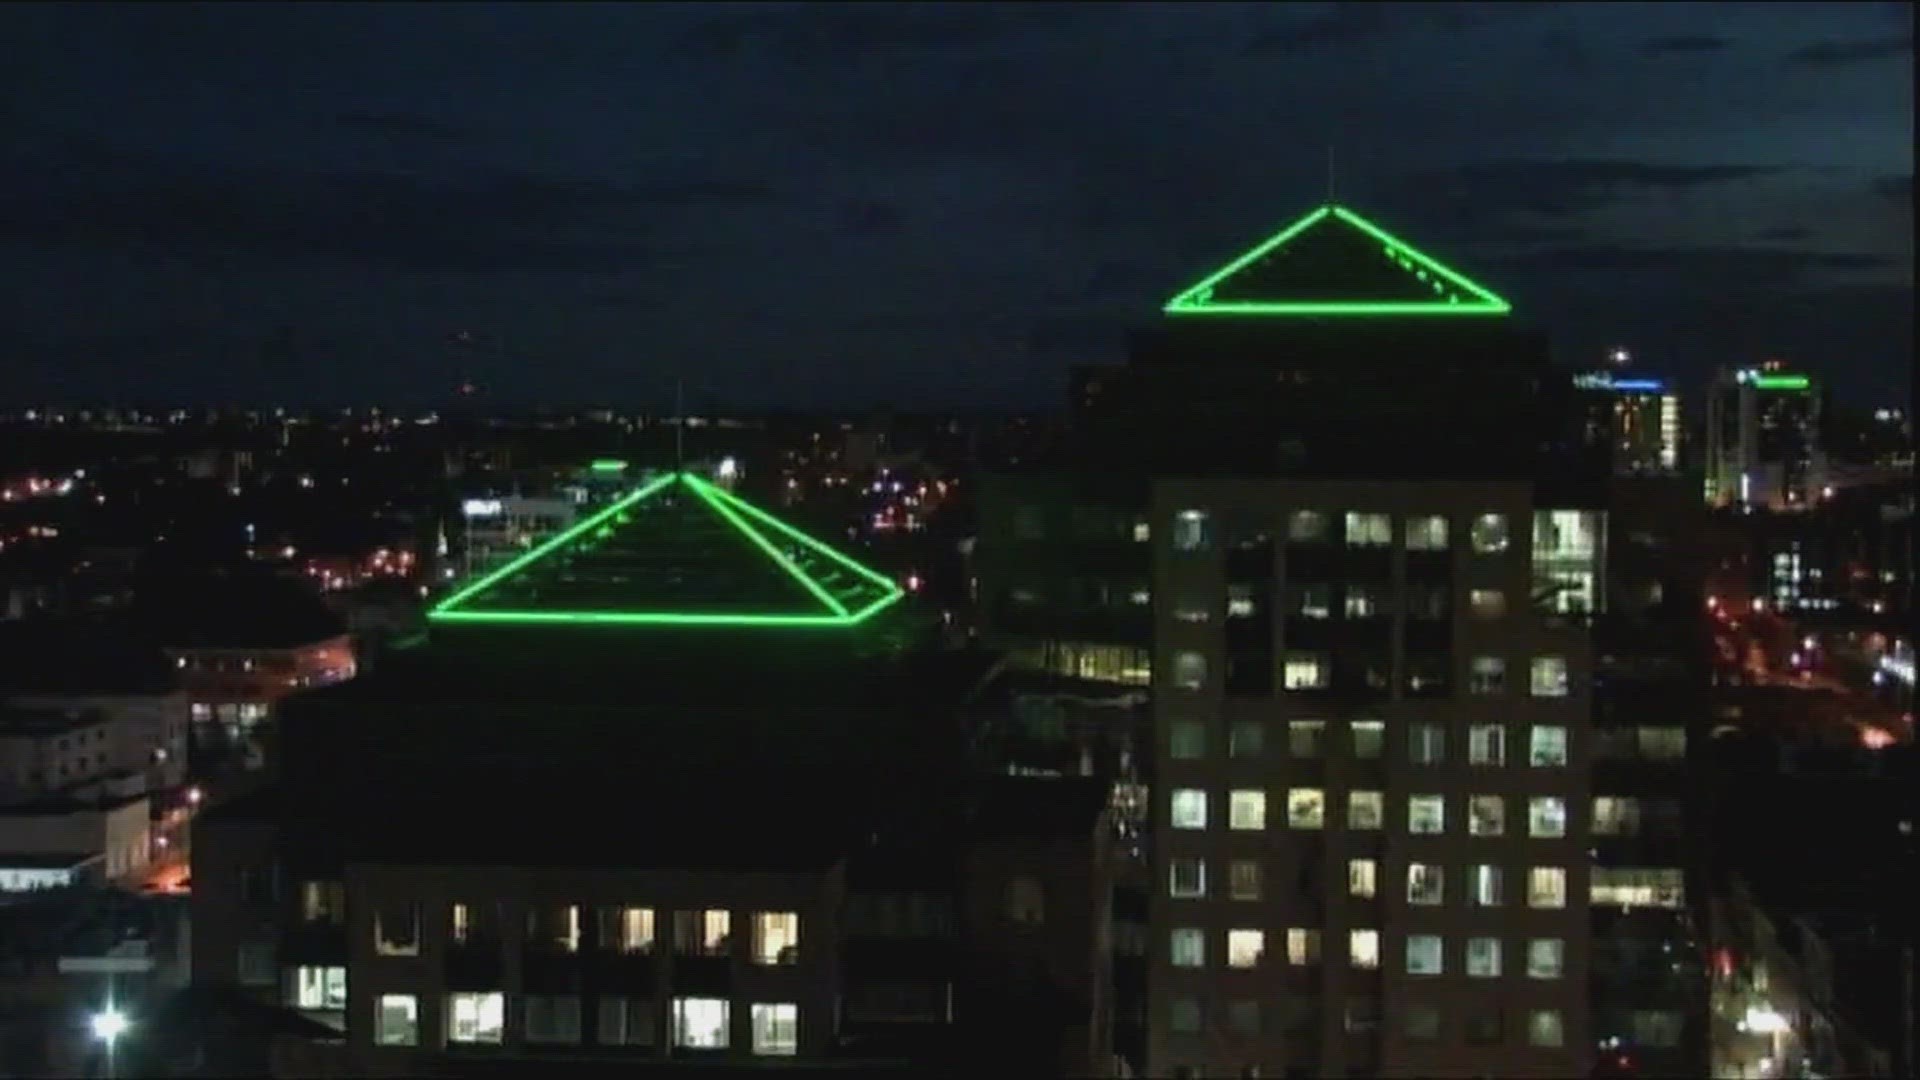 Buildings in Buffalo and across NYS to be lit in green in honor of St. Patrick's Day